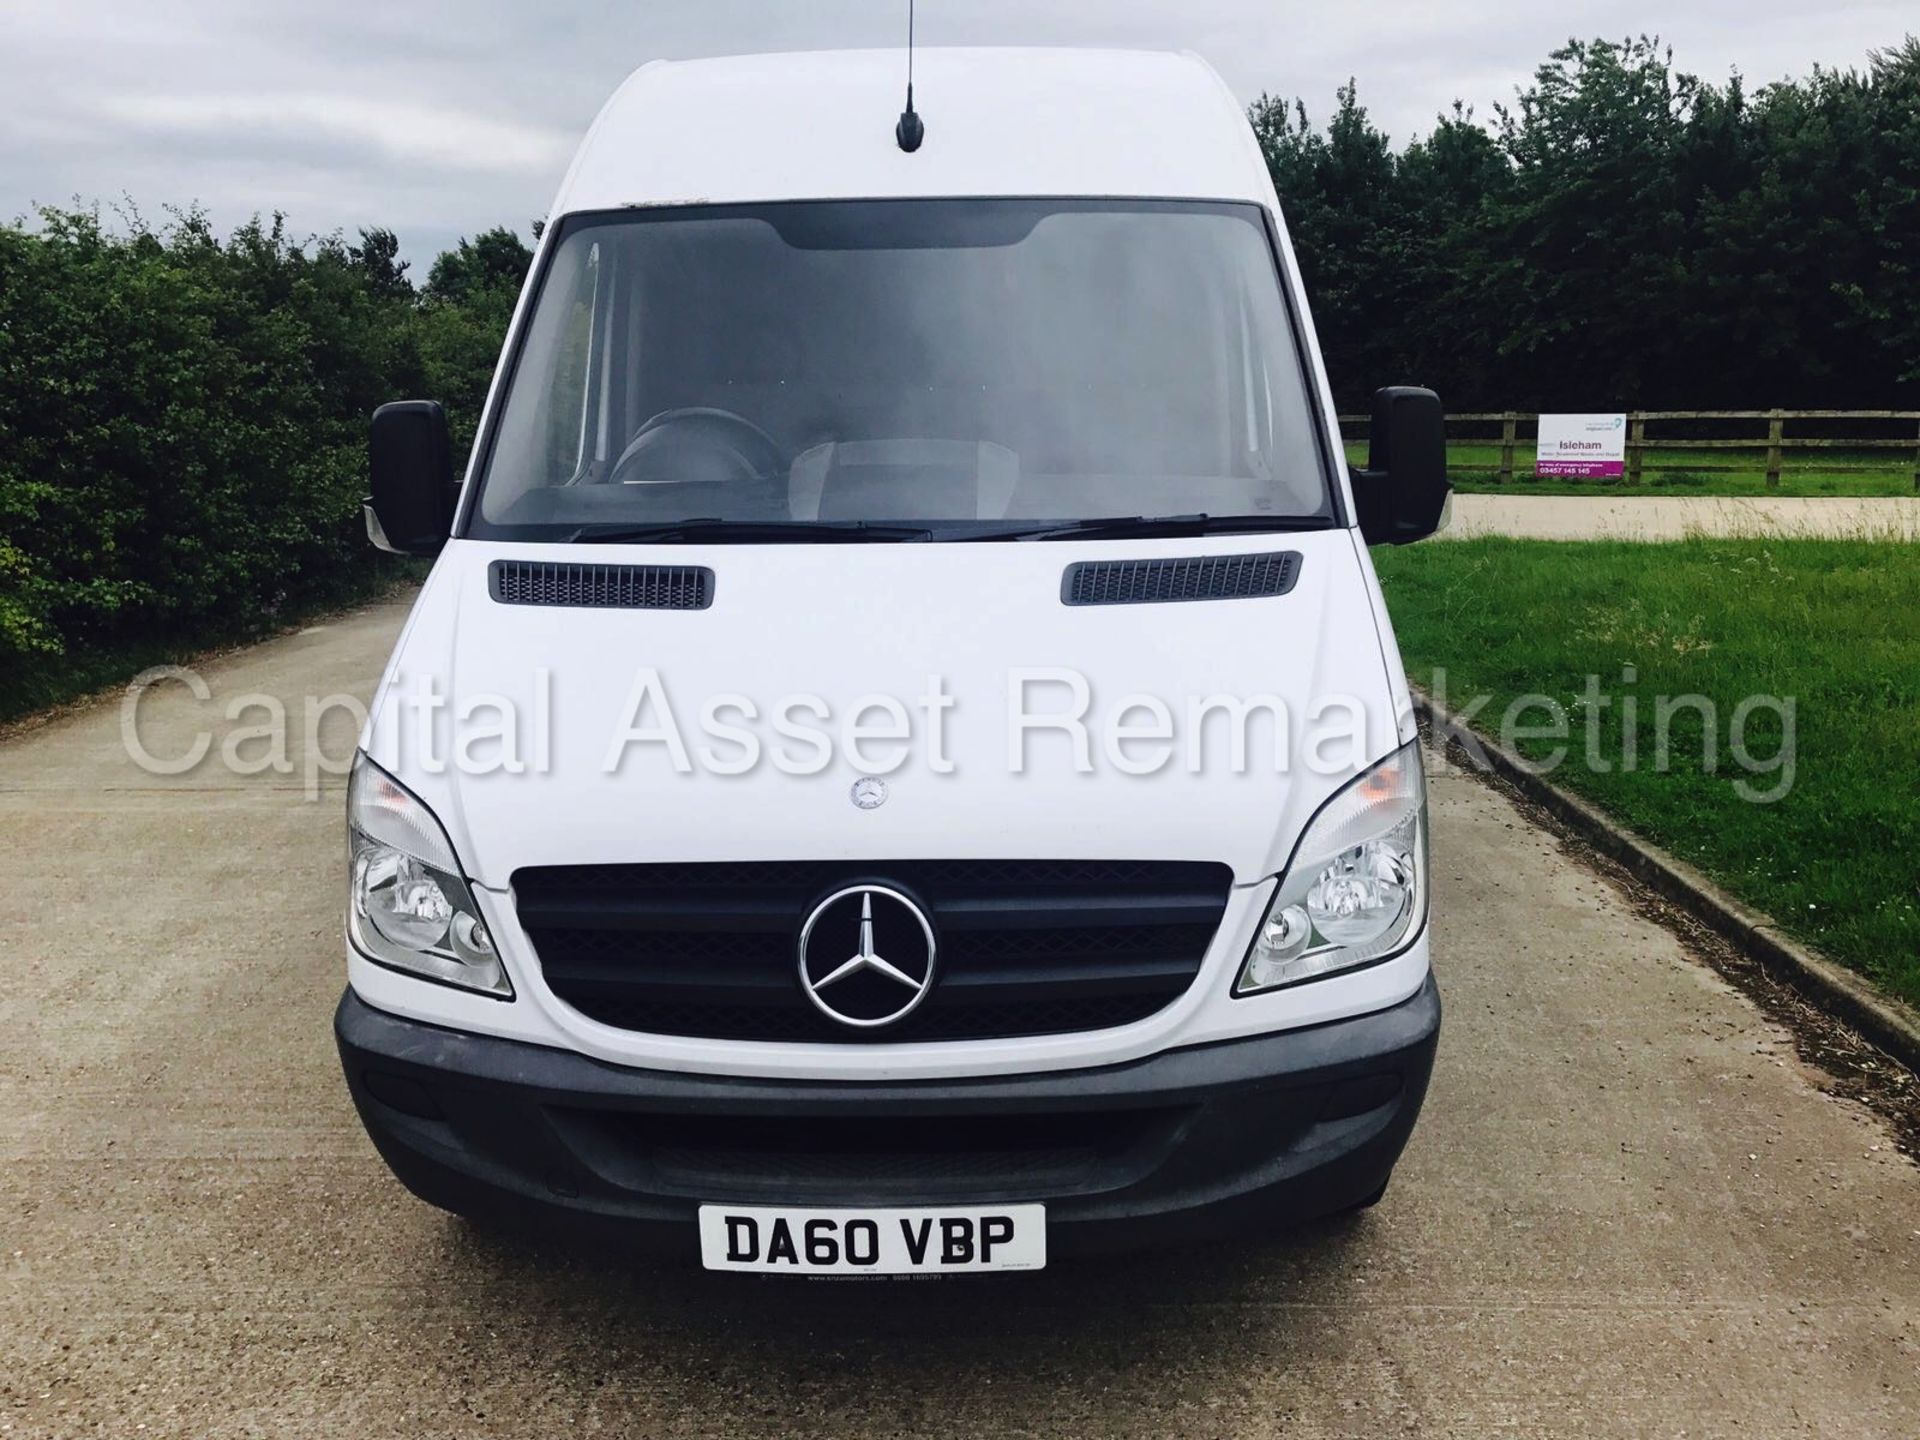 MERCEDES-BENZ SPRINTER 313 CDI 'MWB HI-ROOF' (2011) '130 BHP' (1 FOMRER COMPANY OWNER FROM NEW) - Image 2 of 13